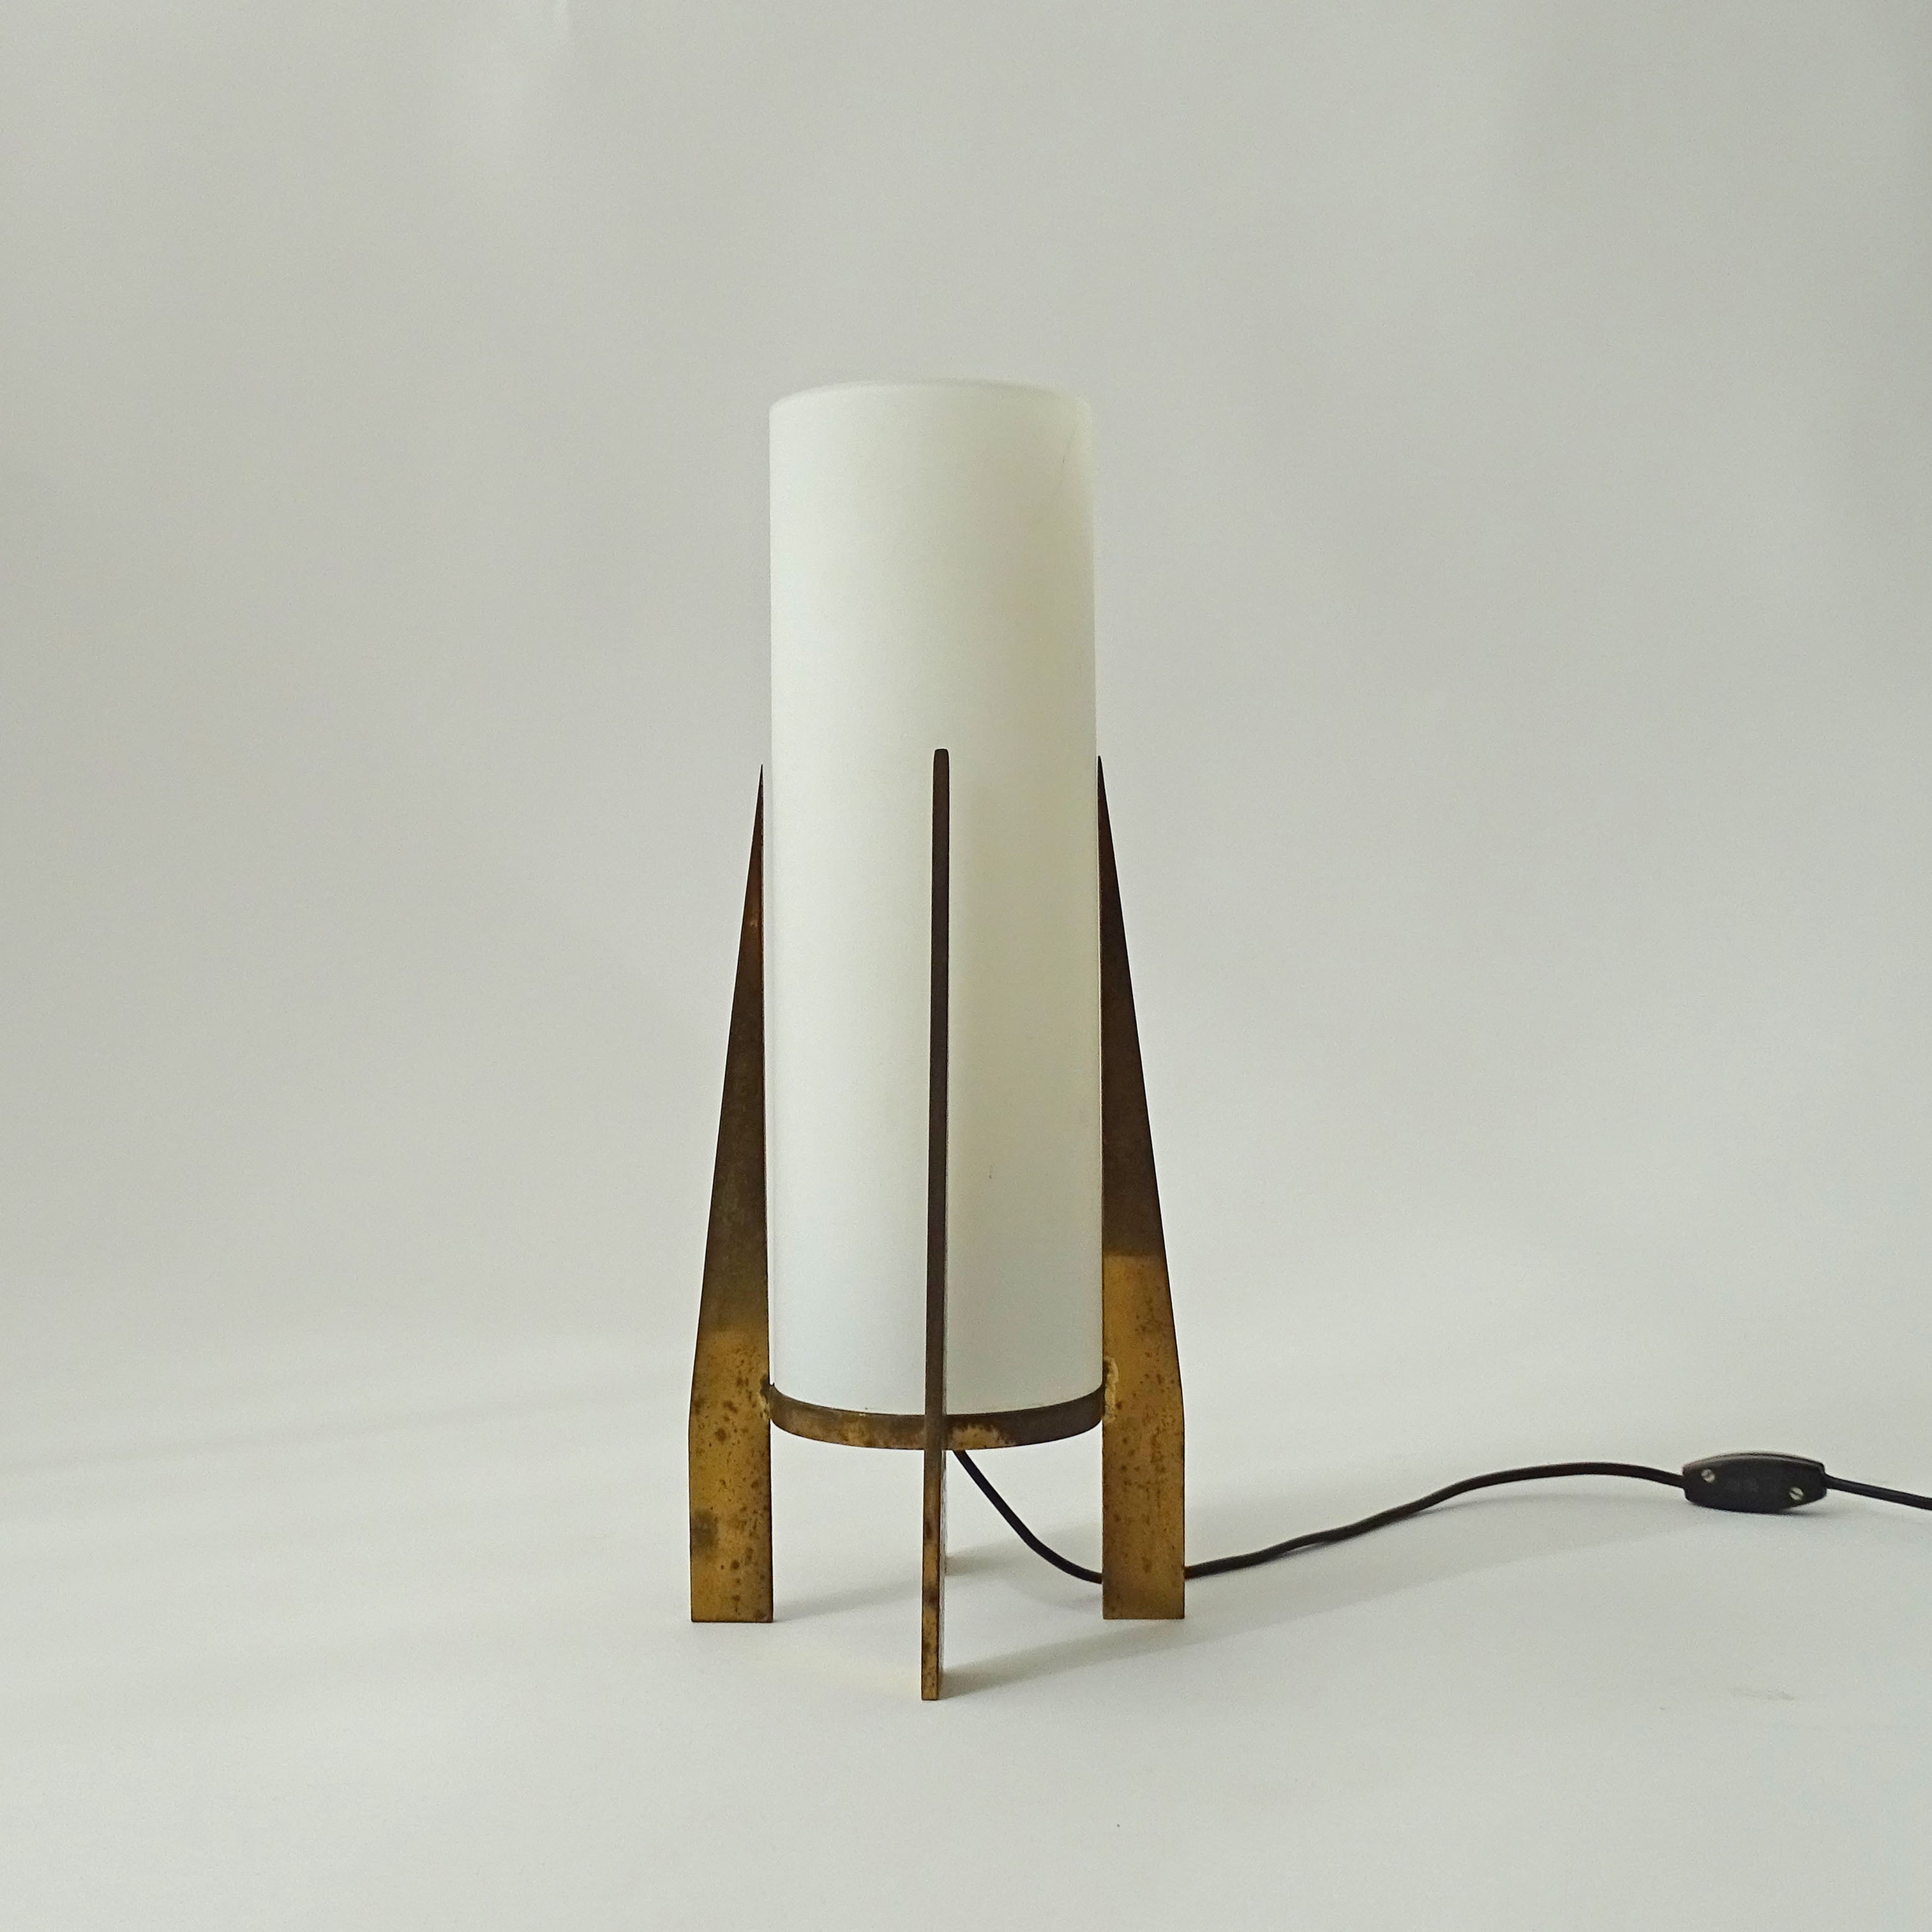 Splendid Architectural shaped Table Lamp by Stilnovo.
Brass and opaline glass.
Italy 1950s